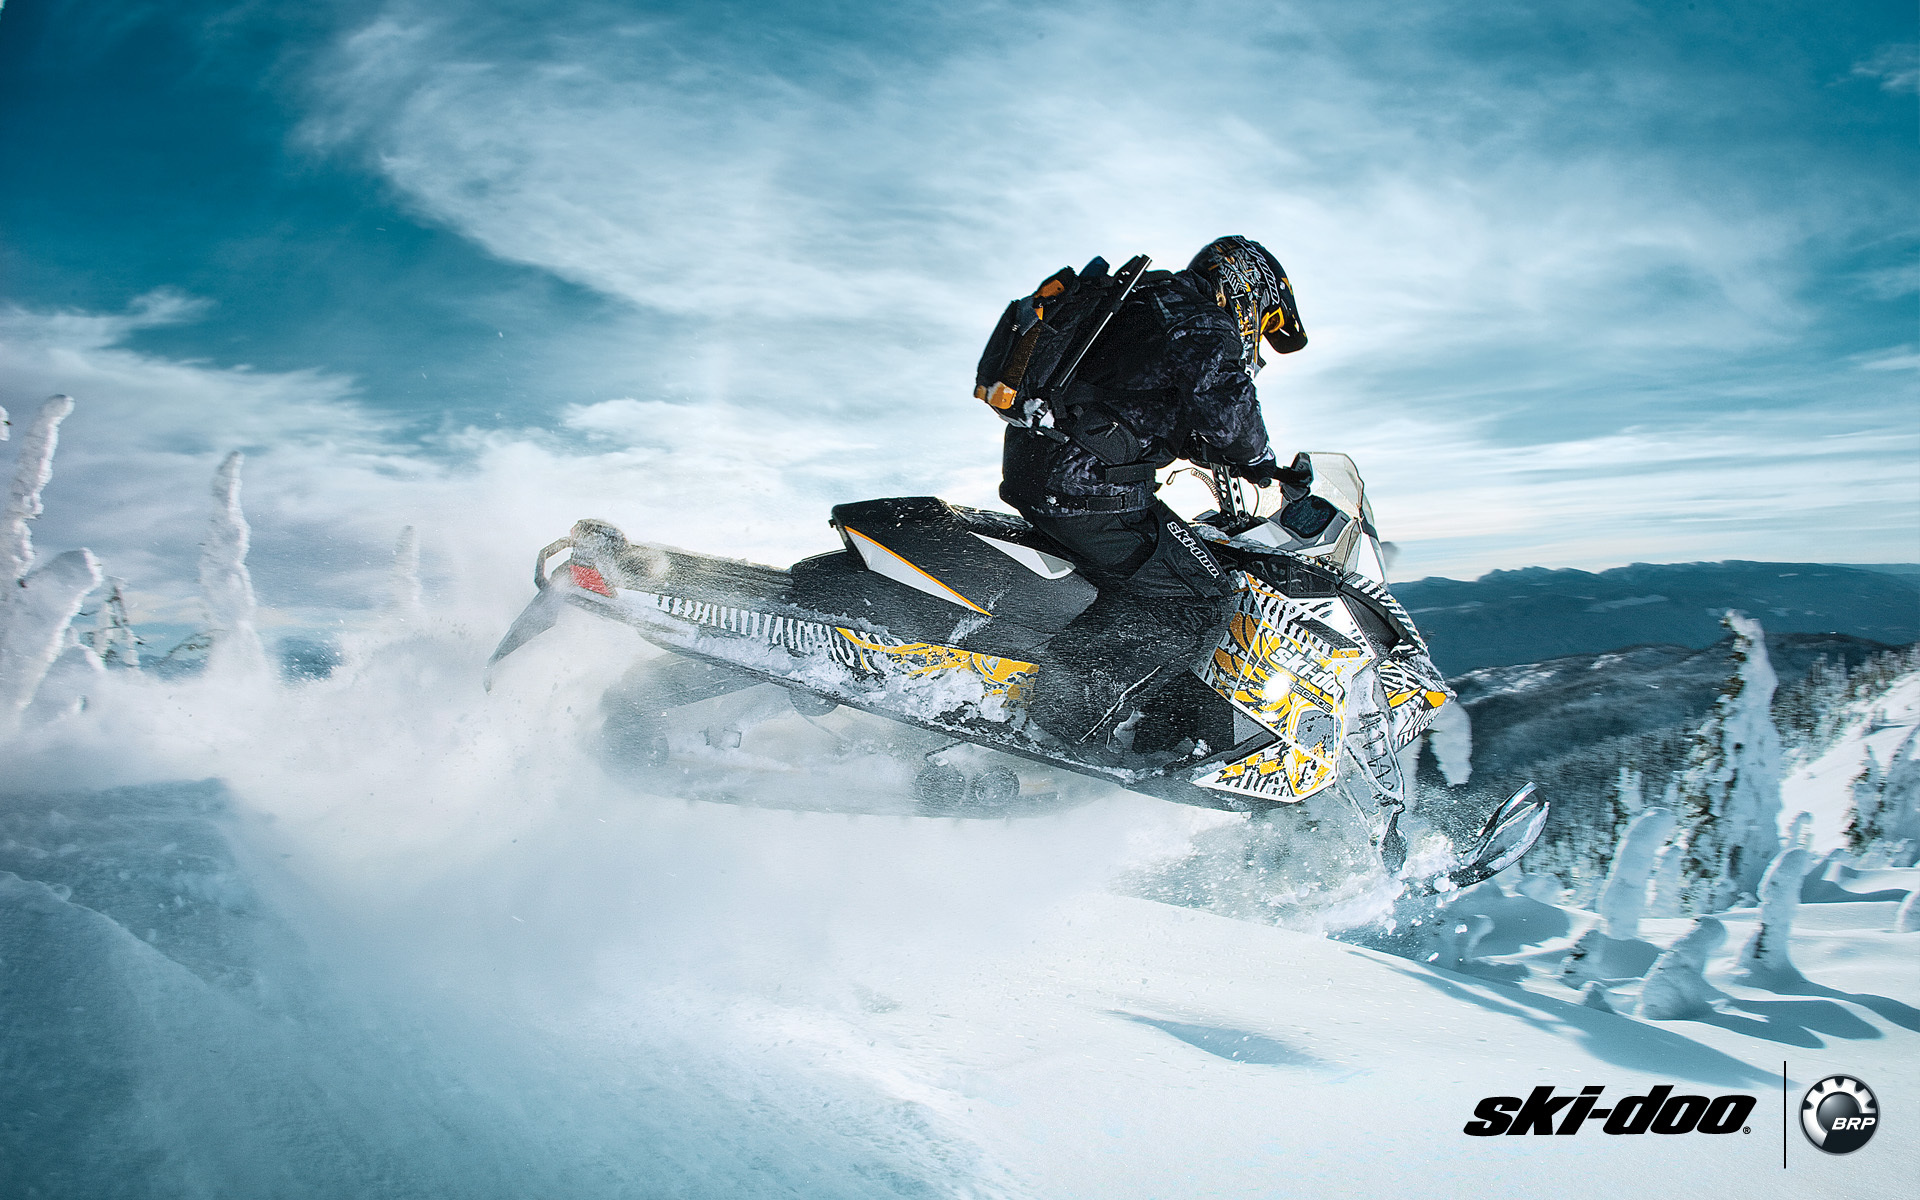  snowmobile brp snow sports jump wallpapers photos pictures